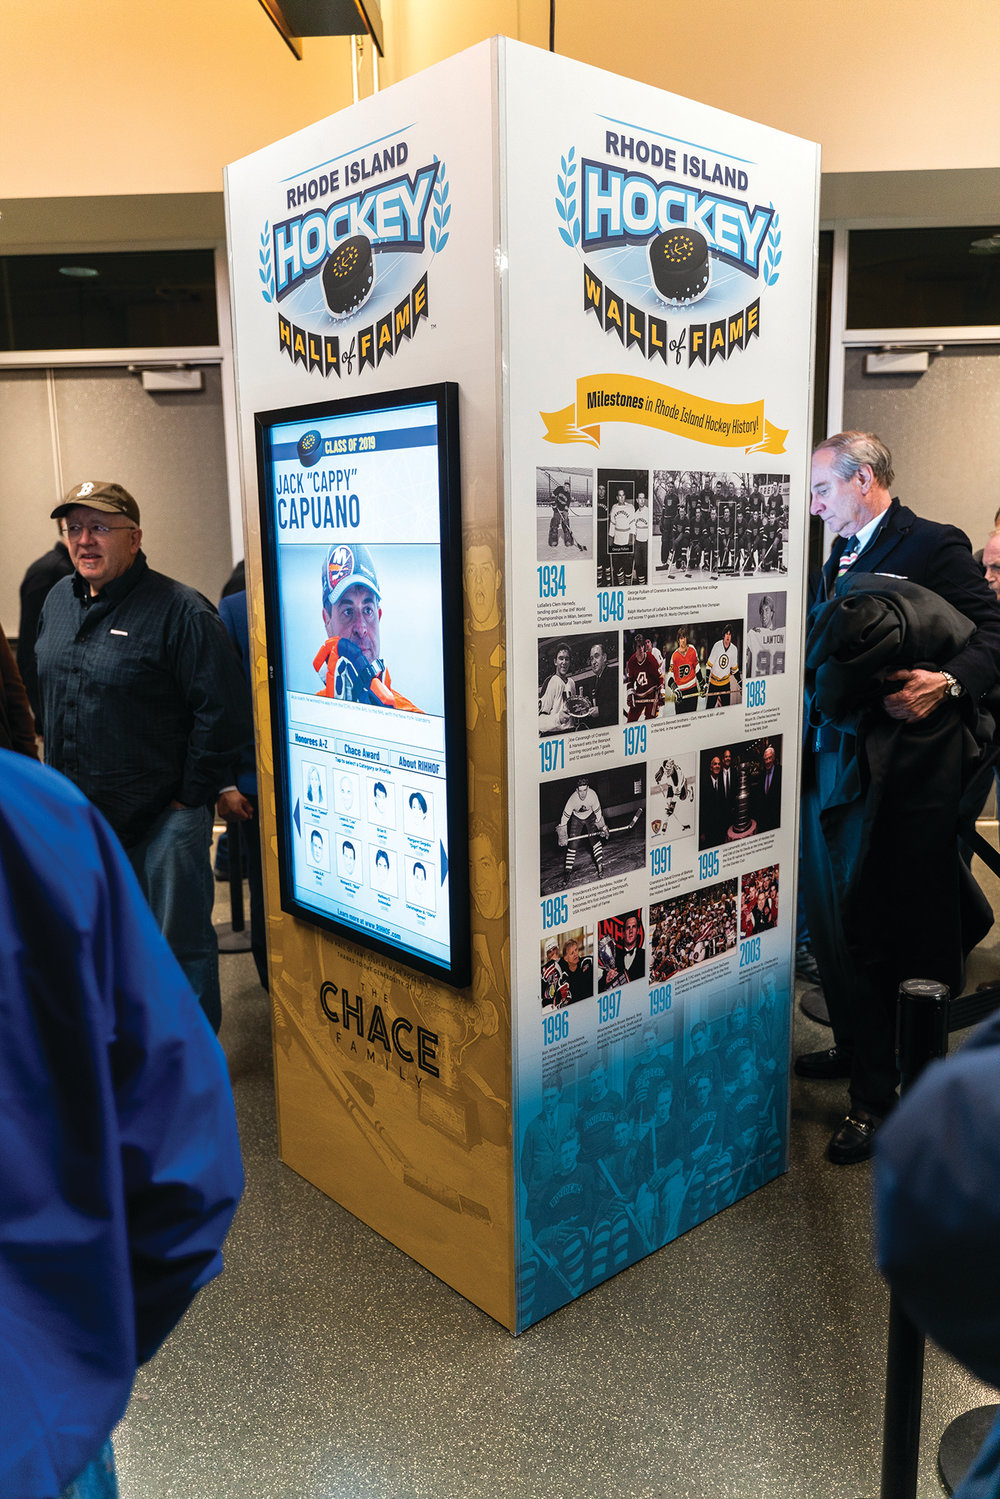 LEGENDARY LINK: This is the Rhode Island Hockey Hall of Fame’s new “Wall of Fame” interactive kiosk.